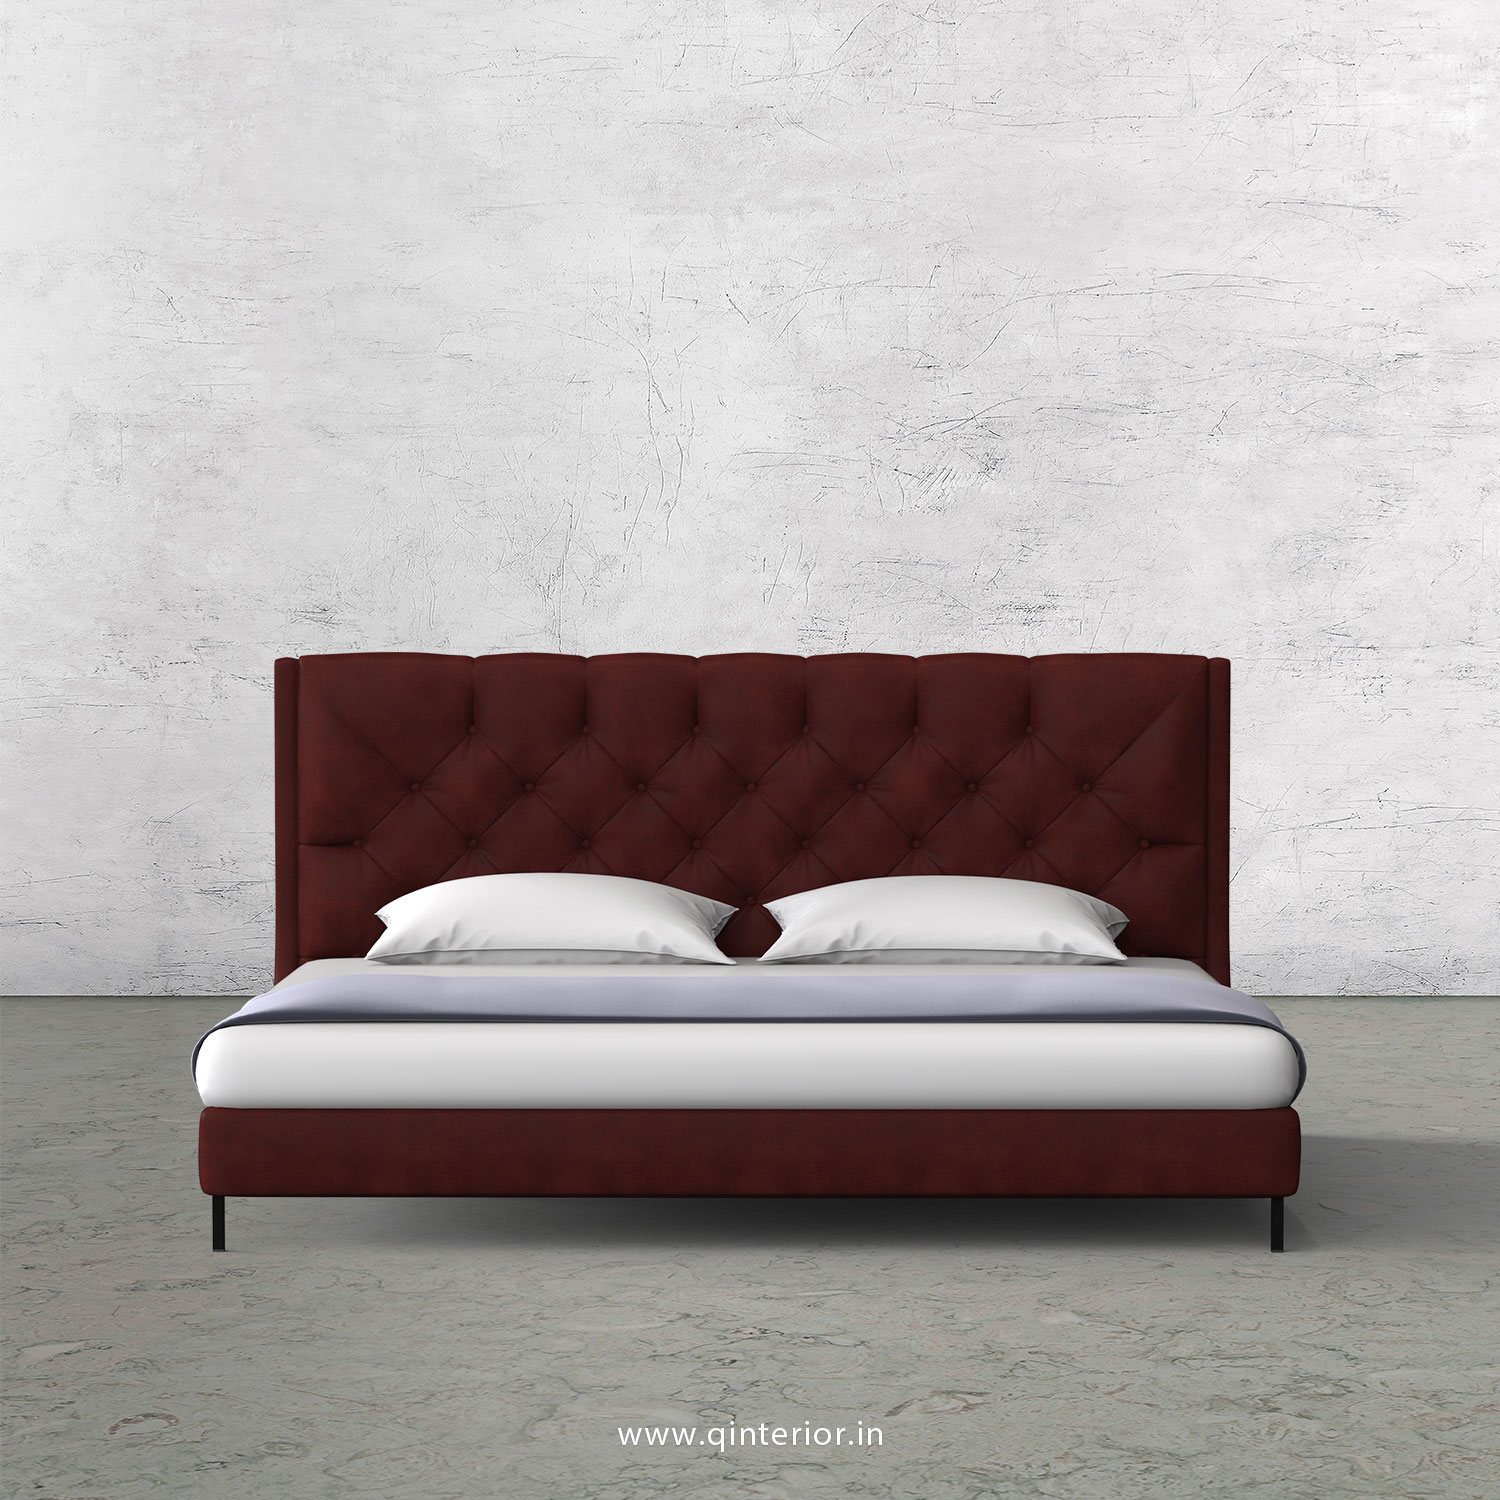 Scorpius King Size Bed in Fab Leather Fabric - KBD003 FL17